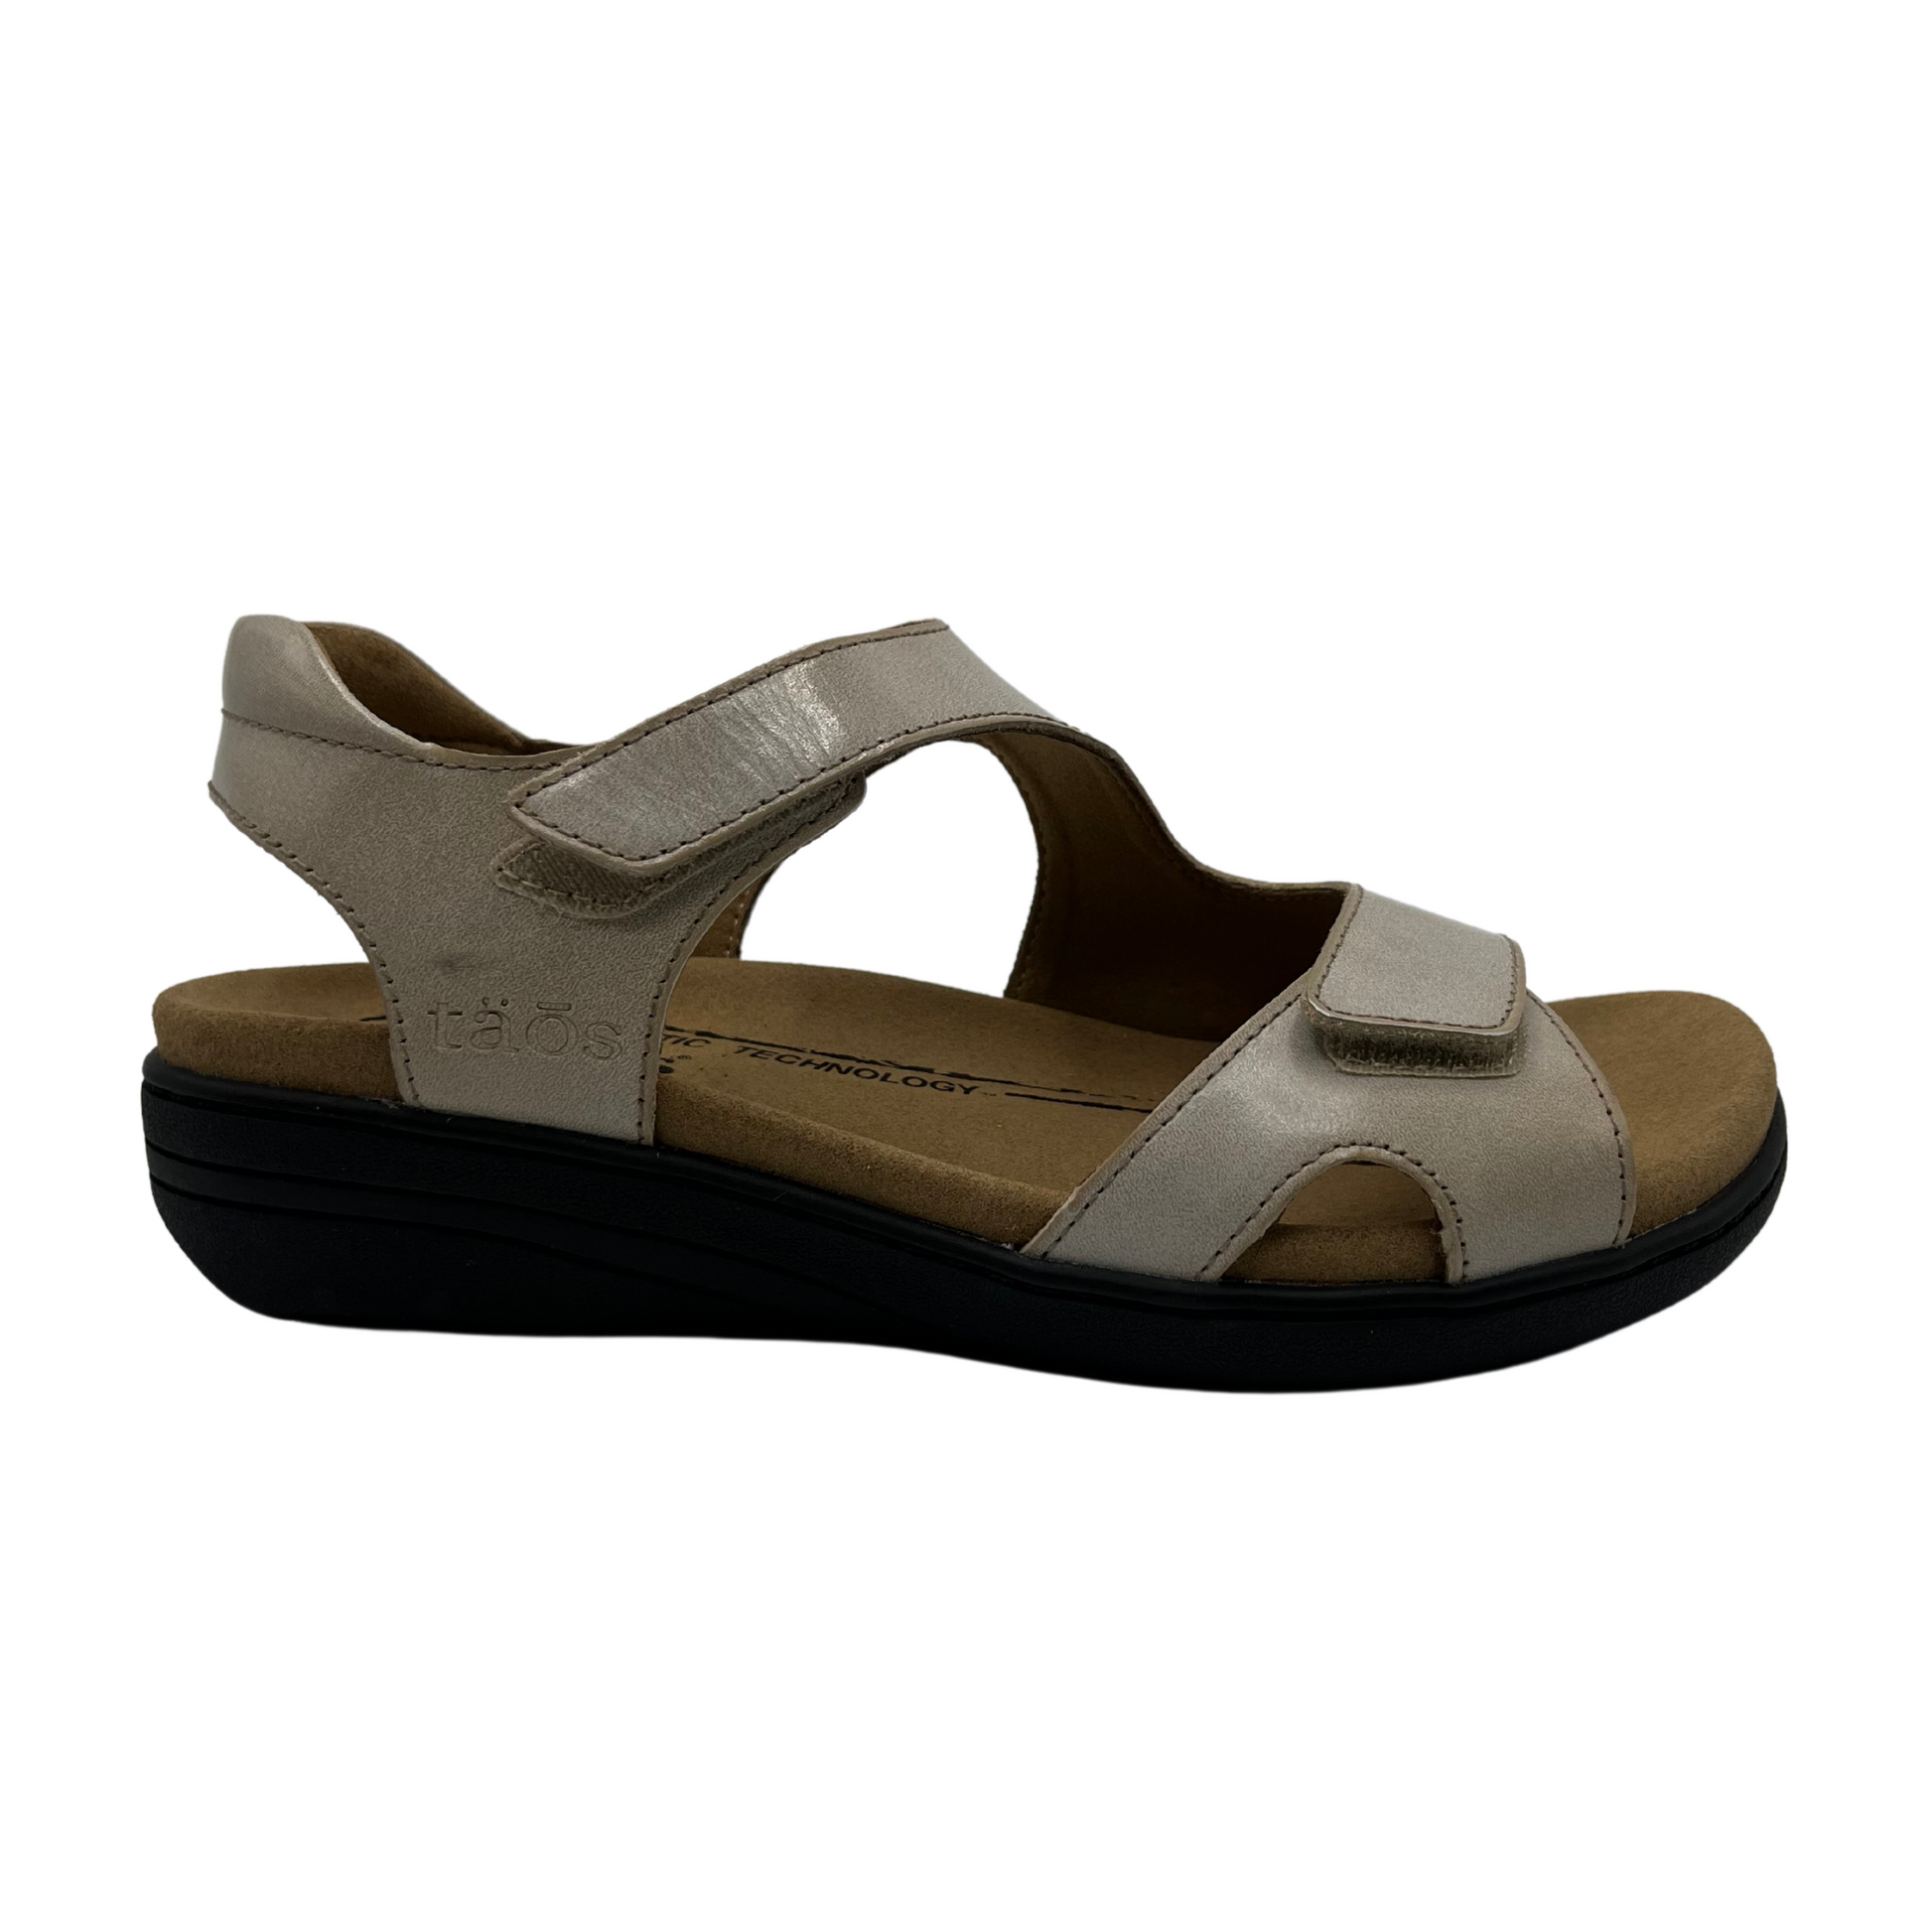 Right facing view of leather sandals with hook and loop closure straps, cushioned collar and leather lined footbed.